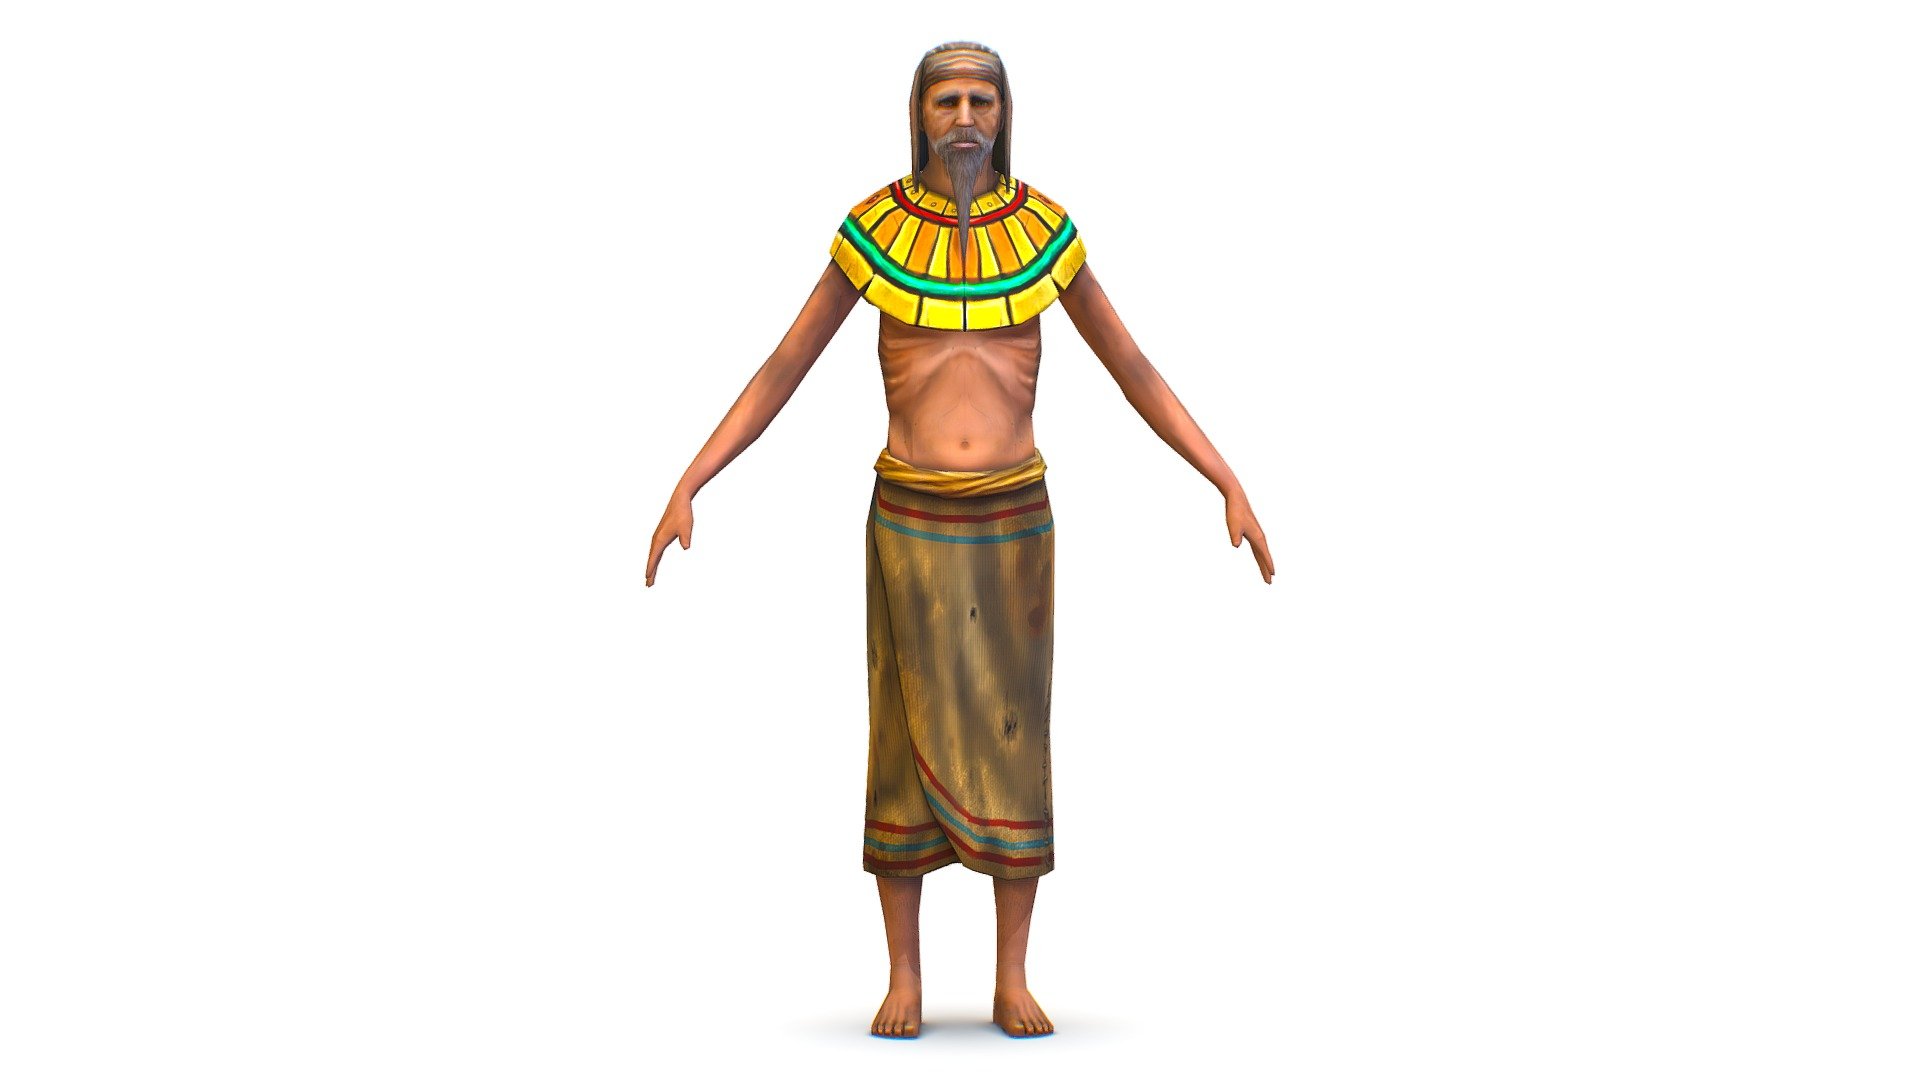 1 color textures 4096x4096
3200 poly count
3dsMax / Maya file included

Support me on Patreon, please - https://www.patreon.com/art_book - Skinny Old Man Headband Egyptian Style Necklace - Buy Royalty Free 3D model by Oleg Shuldiakov (@olegshuldiakov) 3d model